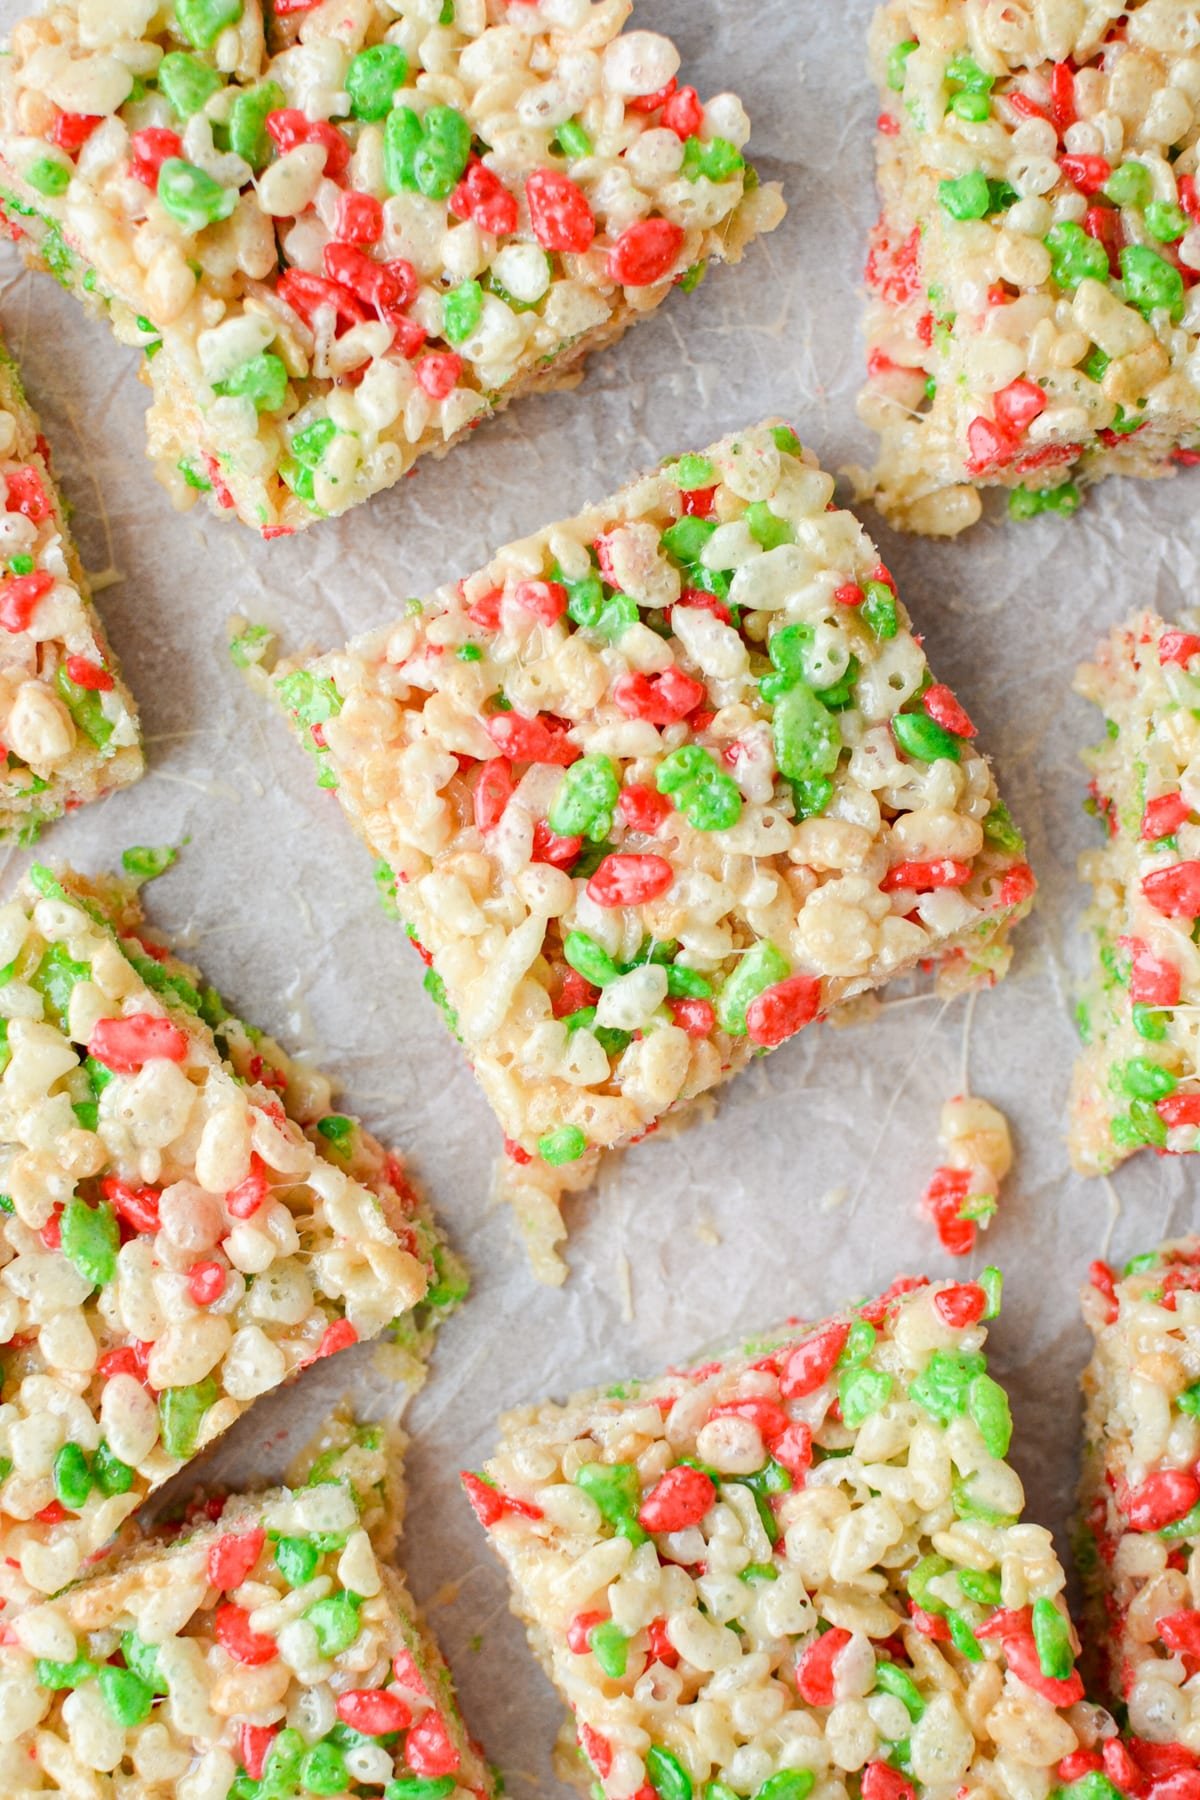 An overhead view of holiday Rice Krispie treats on a parchment lined baking sheet.